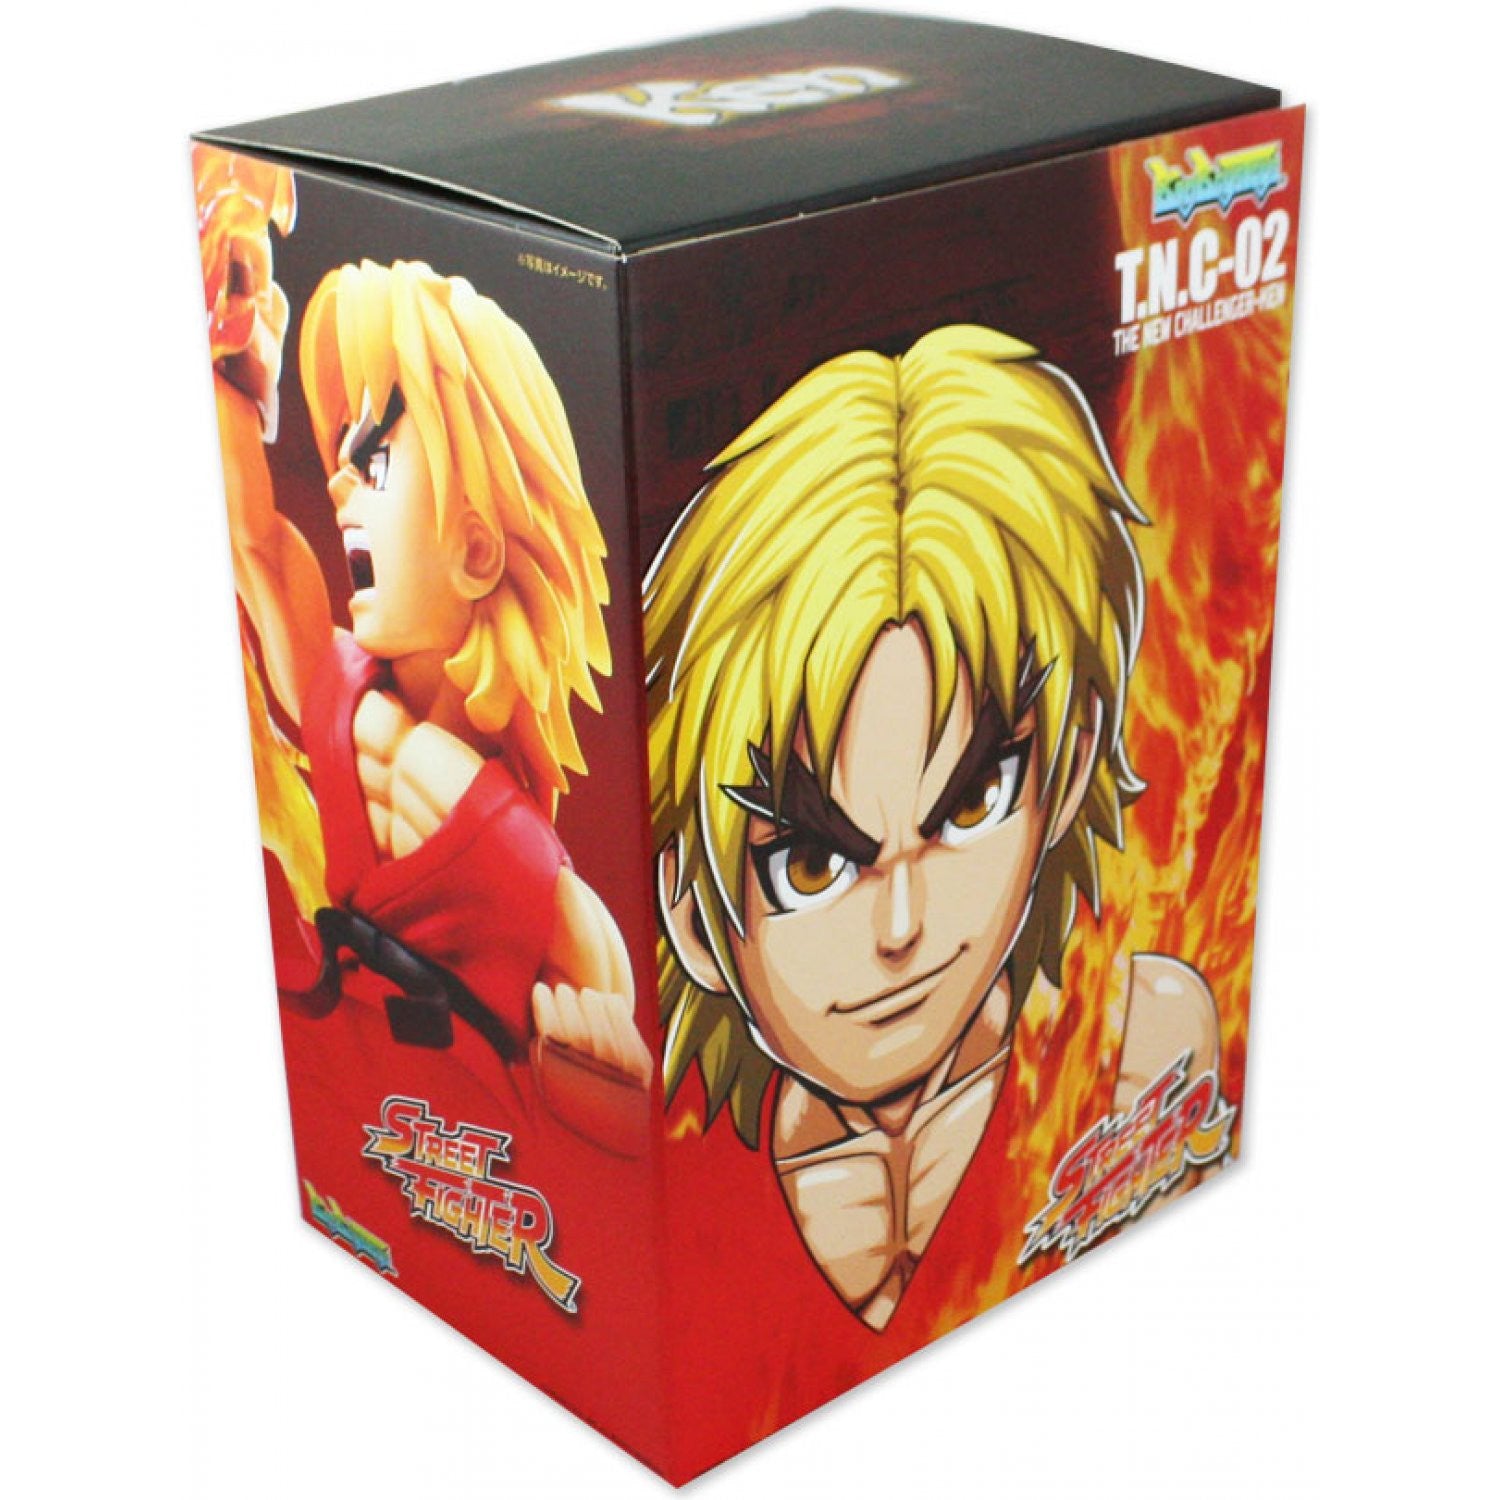 Street Fighter The New Challenger Figure 02 - Ken Retropixl Retrogaming retro gaming Rare Console Collector Limited Edition Japan Import